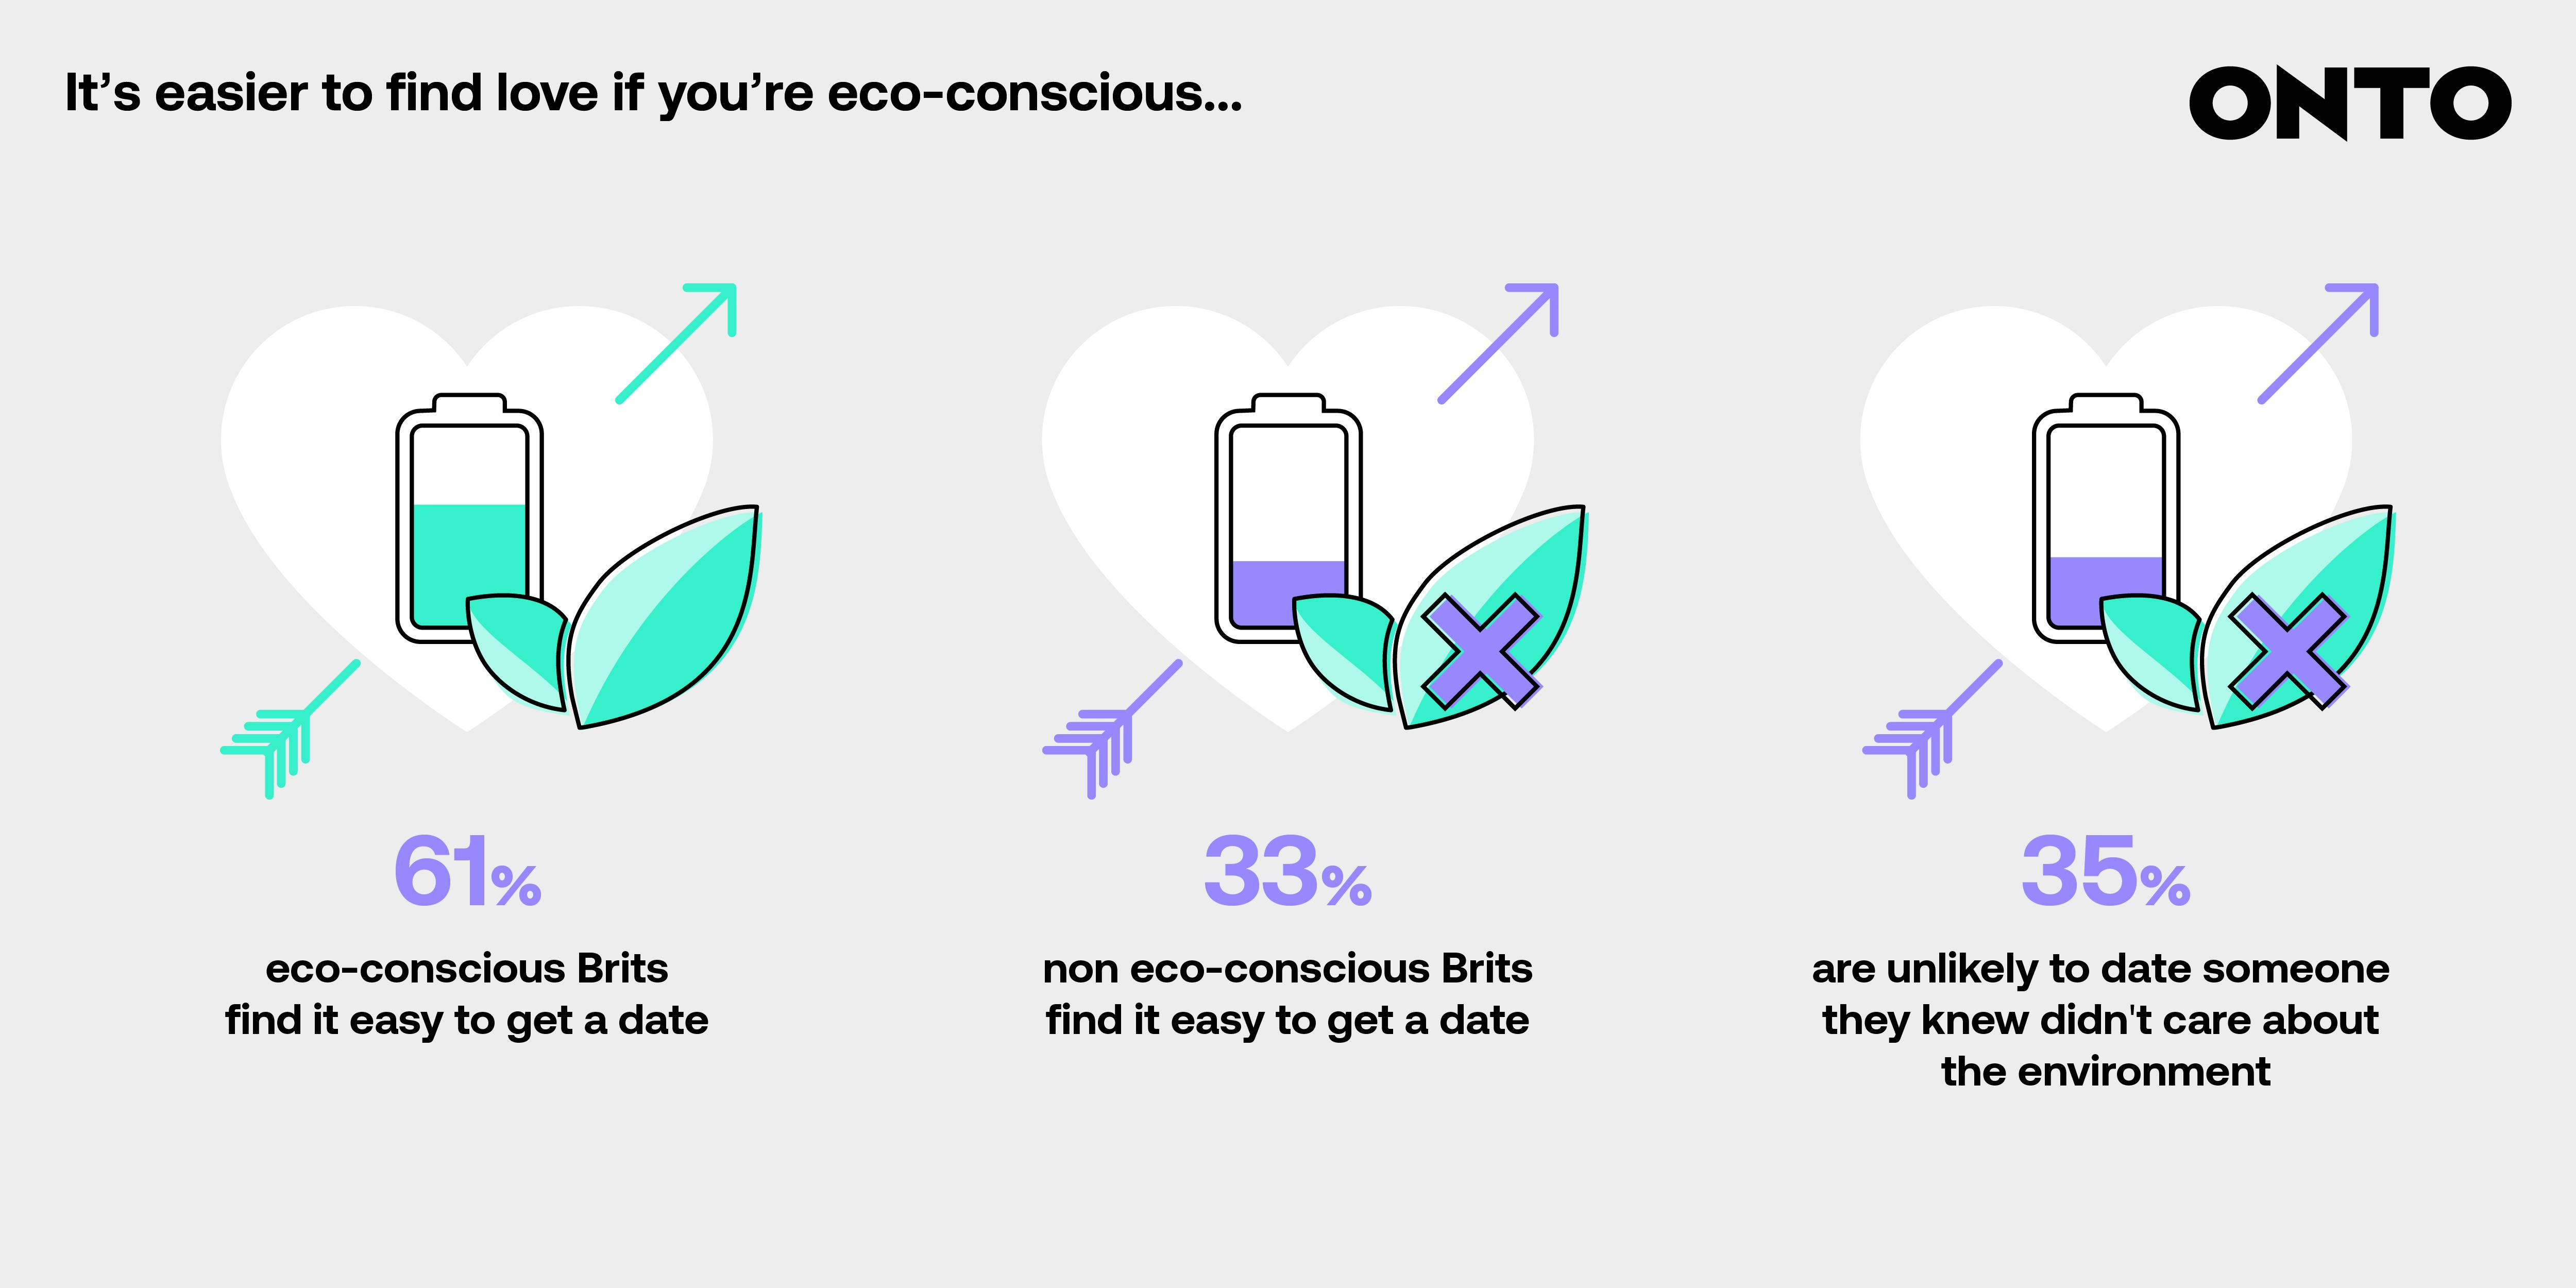 A diagram showing that it's easier to find love if you're eco-conscious with the following statistics. 61% of eco-conscious Brits find it easy to get a date compared to 33% of non eco-conscious Brits find it easy to get a date. 35% are unlikely to date someone they knew didn't care about the environment. 